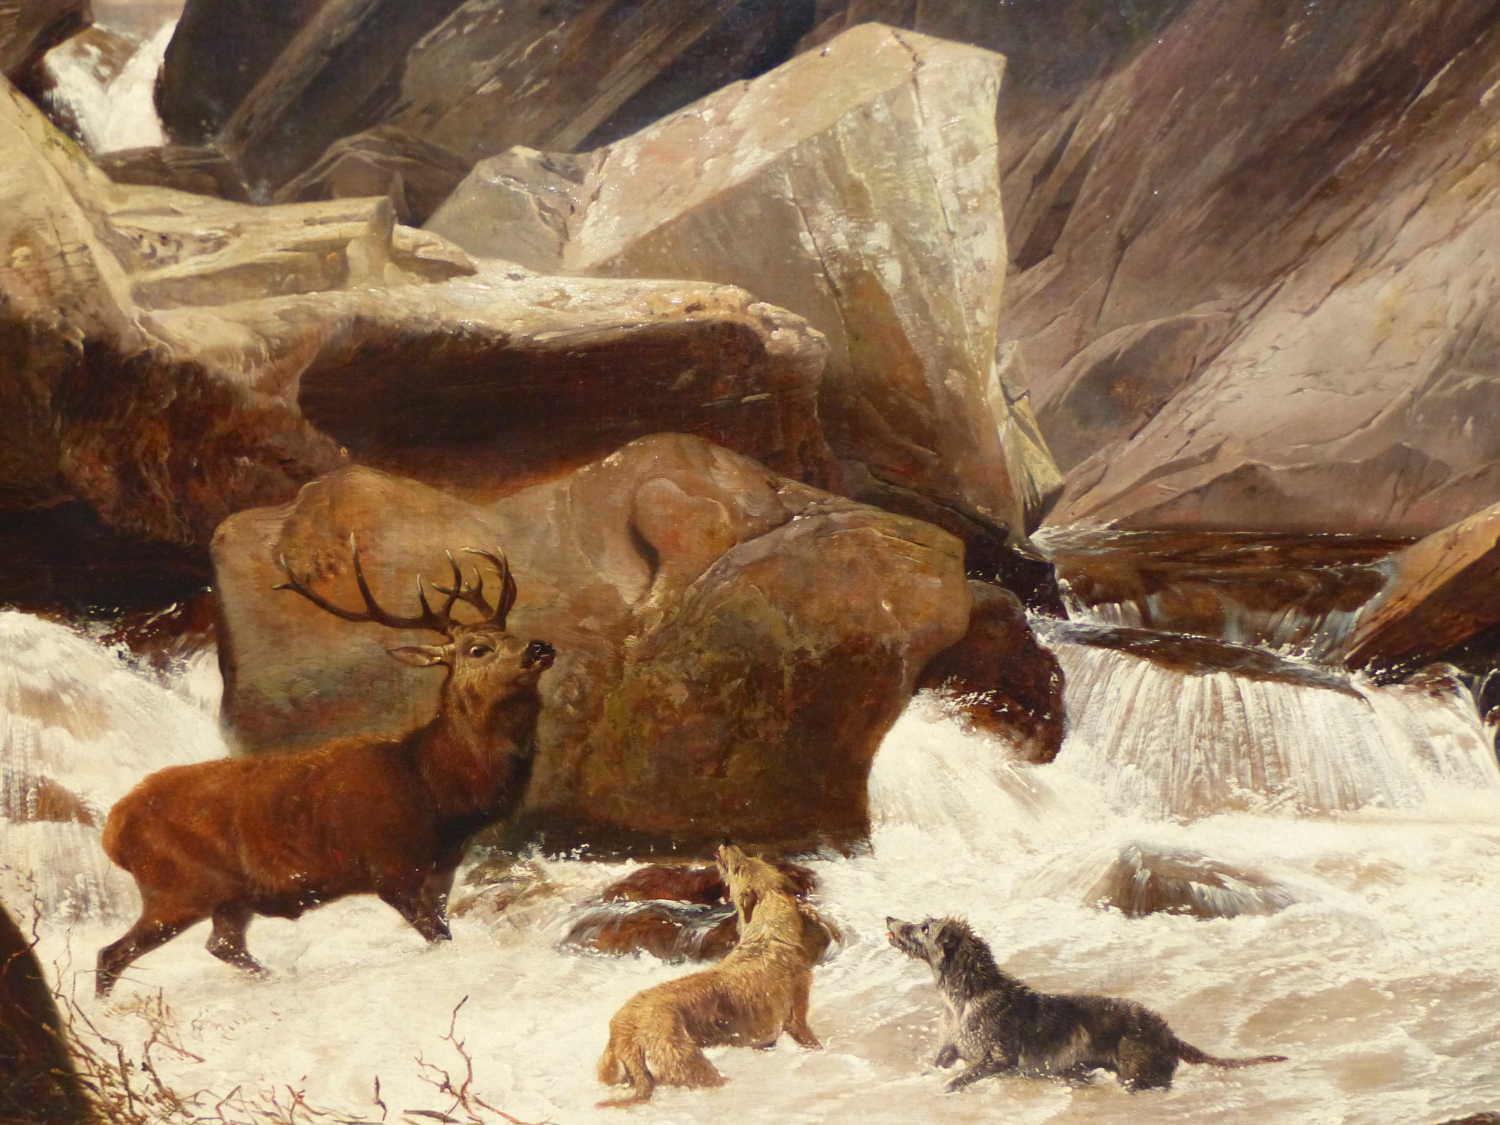 ATTRIBUTED TO RICHARD ANSDELL. (1815-1885) THE STAG AT BAY, OIL ON CANVAS.